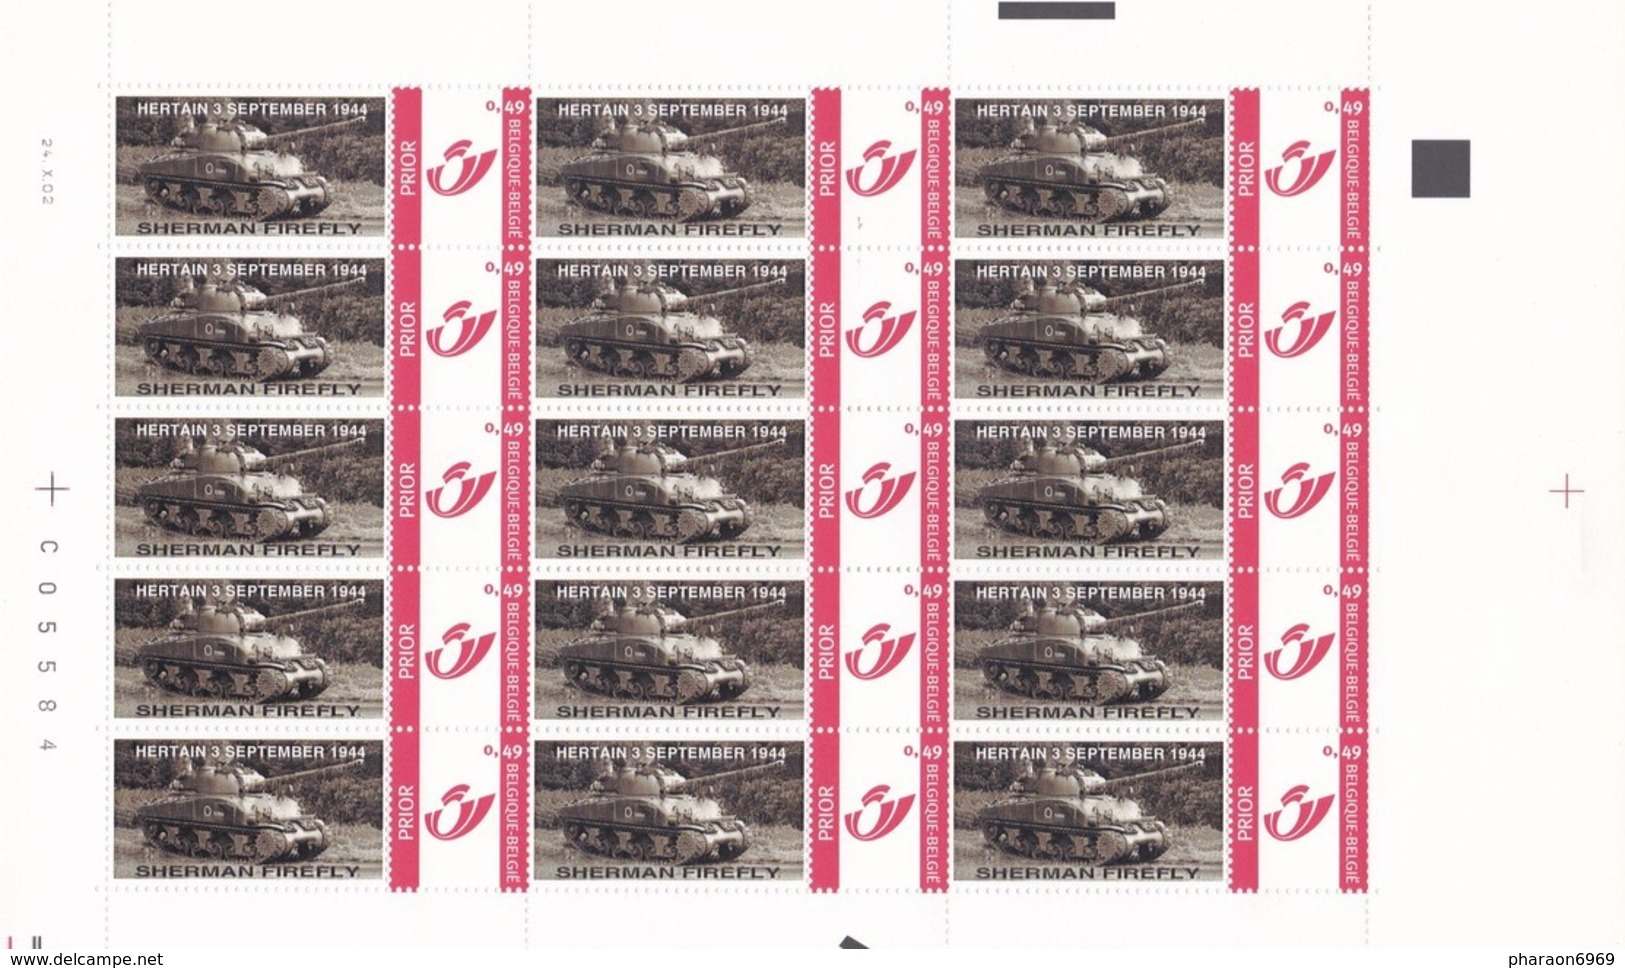 Duostamps Duostamp Char Tank Sherman Firefly Hertain 3 September 1944 - Mint